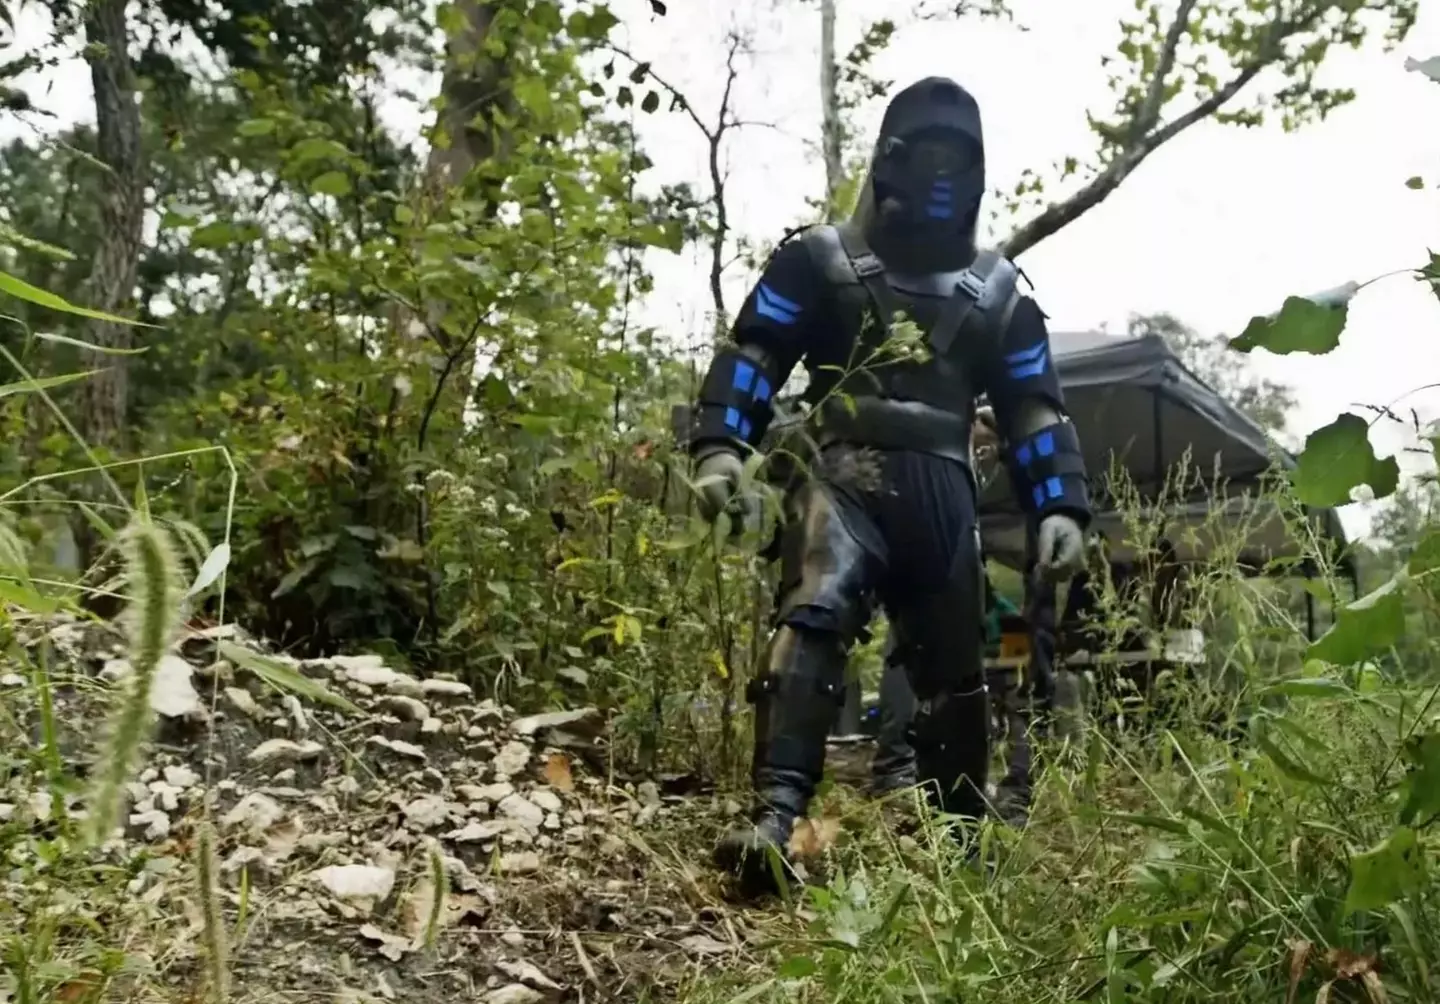 He wore a custom-made carbon fibre suit to protect himself (Discovery Channel)